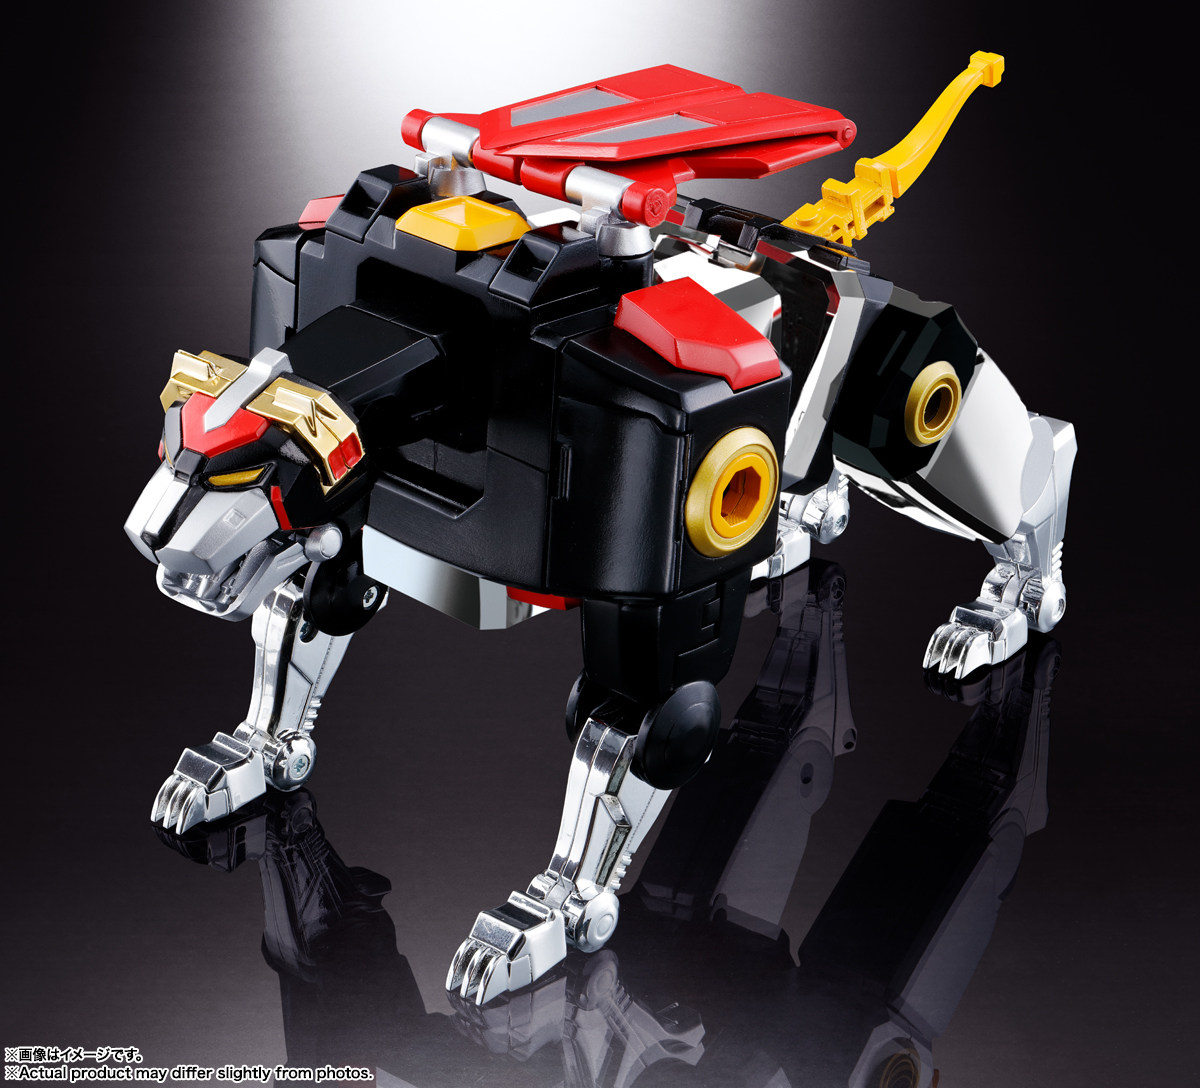 voltron-gx-71sp-voltron-chogokin-action-figure-50th-anniversary-ver image count 2